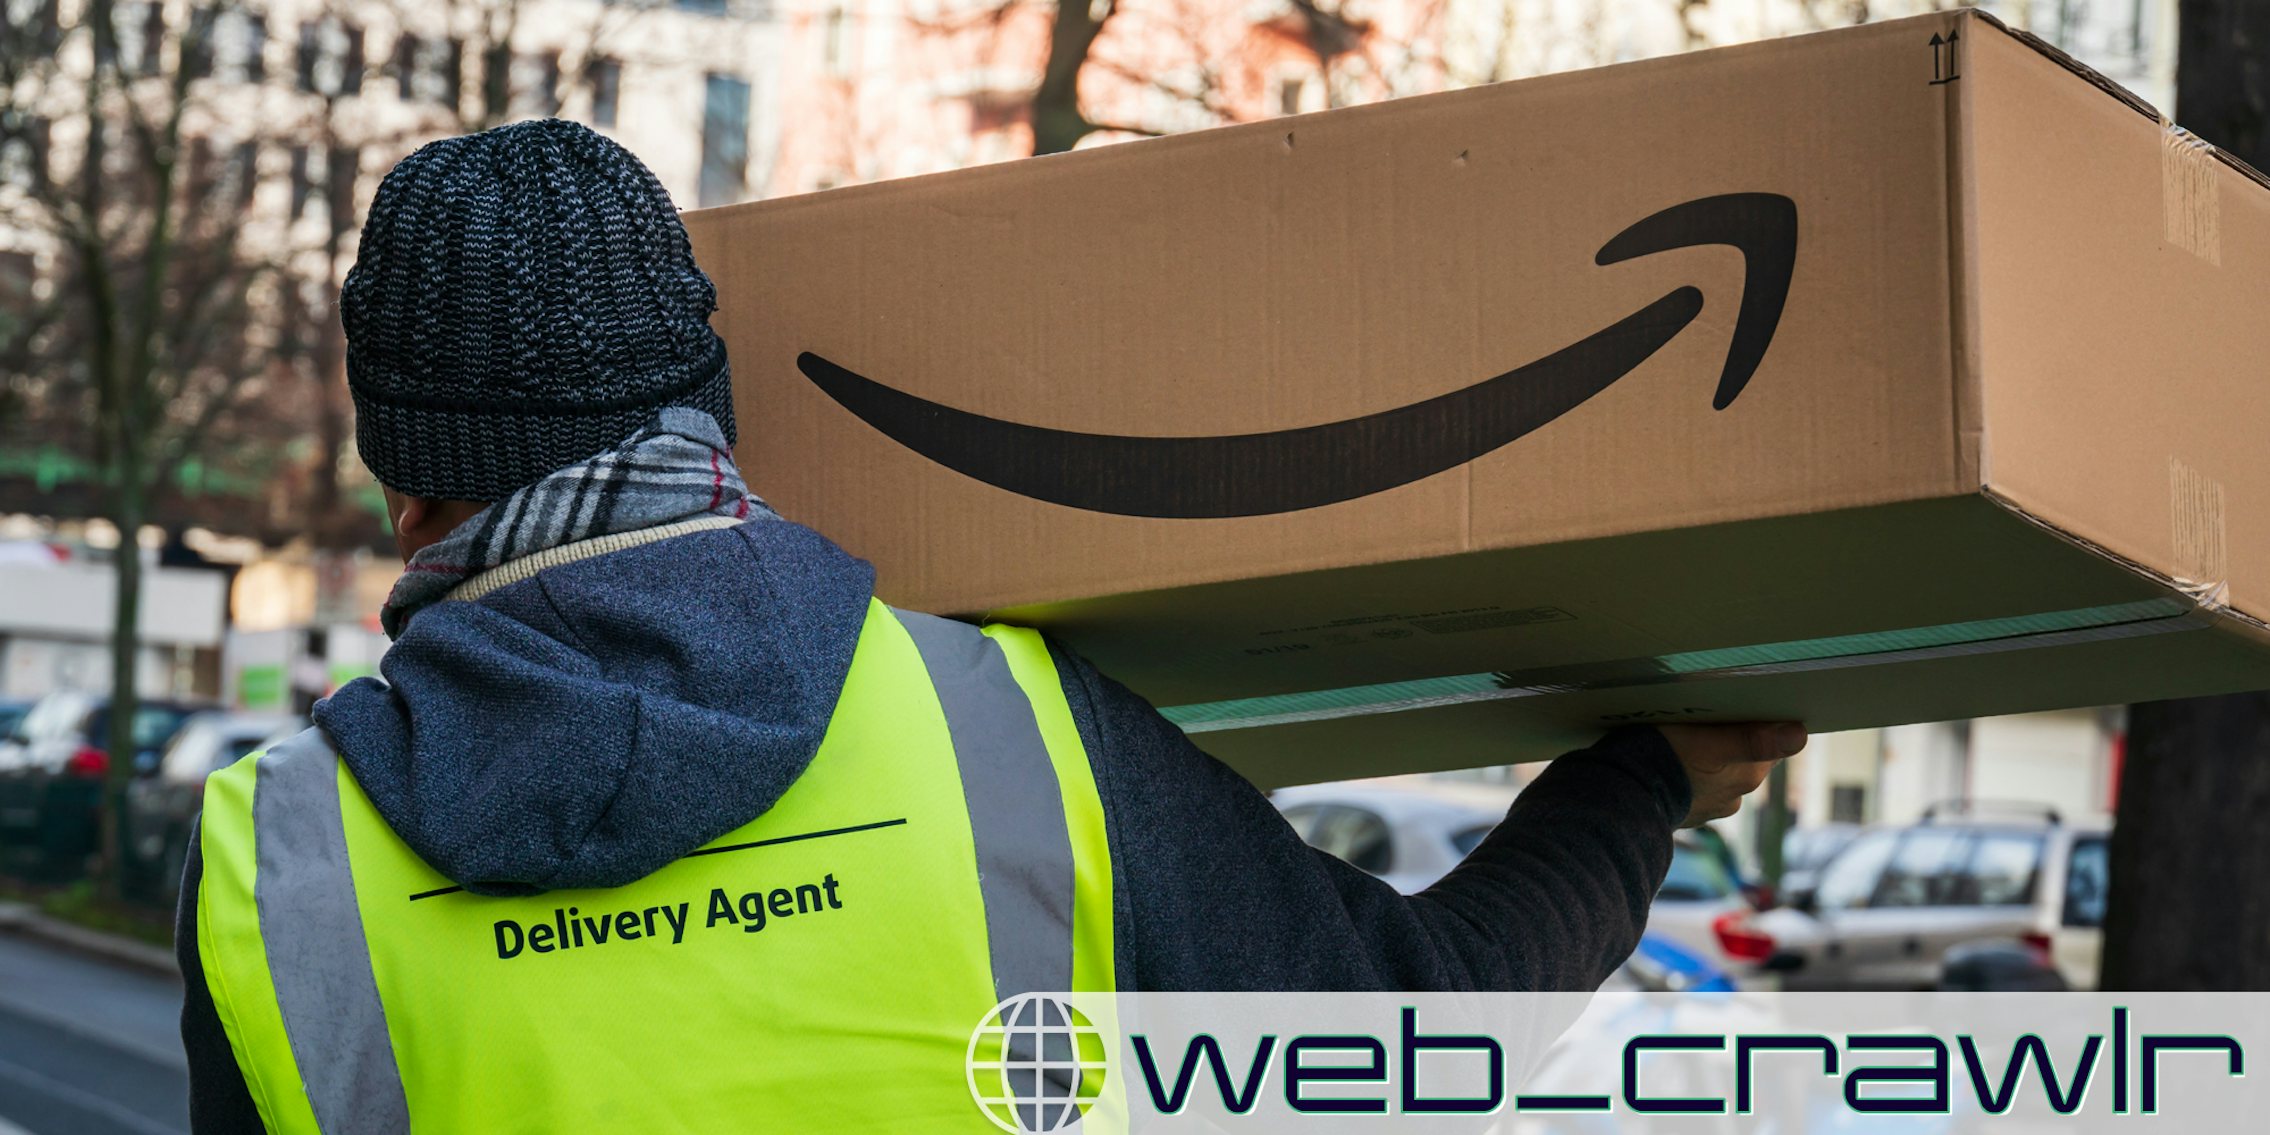 An Amazon delivery driver holding a package. The Daily Dot newsletter web_crawlr logo is in the bottom right corner.